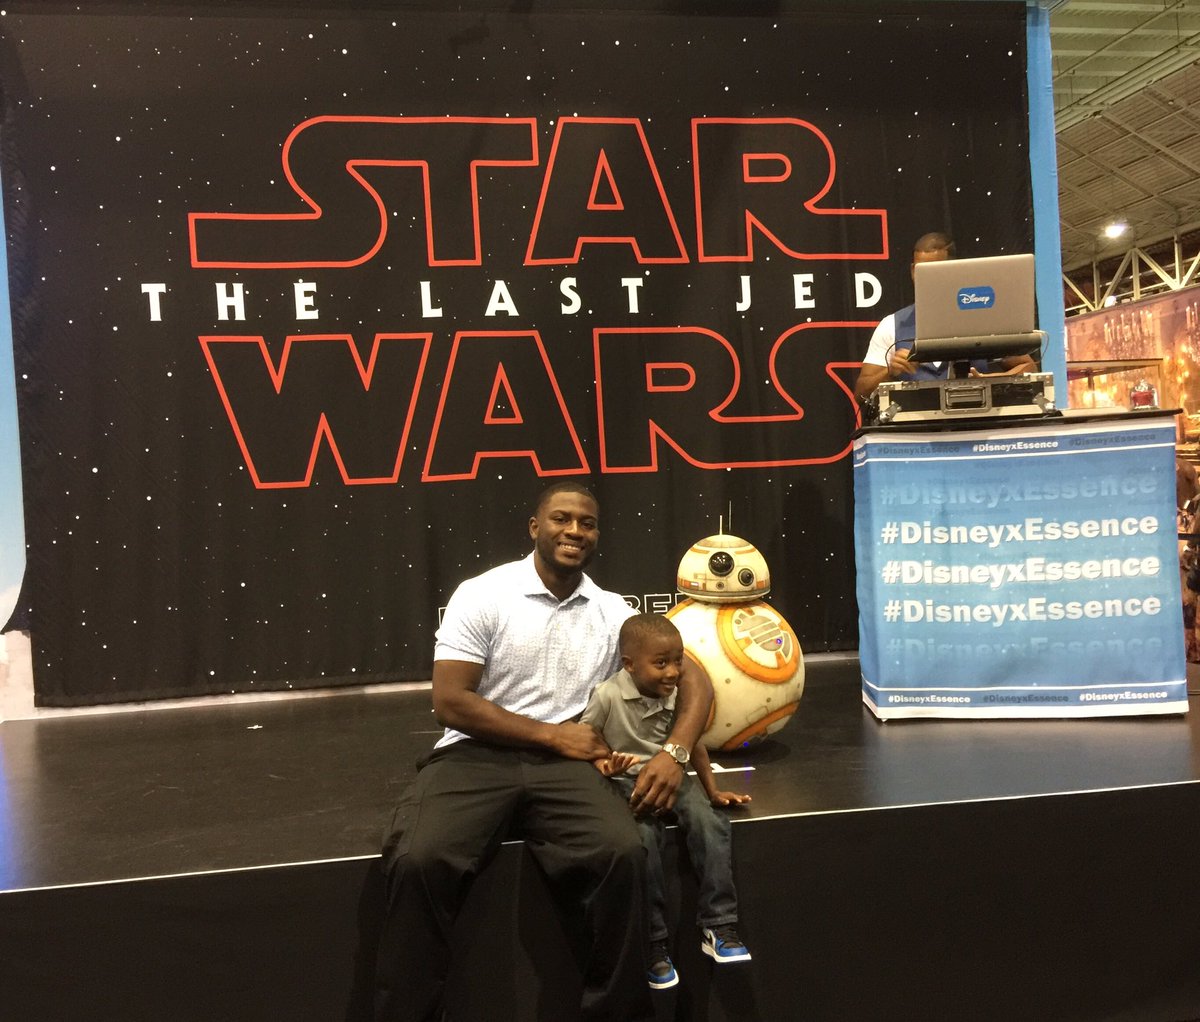 @Disney just made this 3-year old's birthday week extra special! Die hard Star Wars fan meets BB-8! #DisneyxEssence #EssenceFestival #family